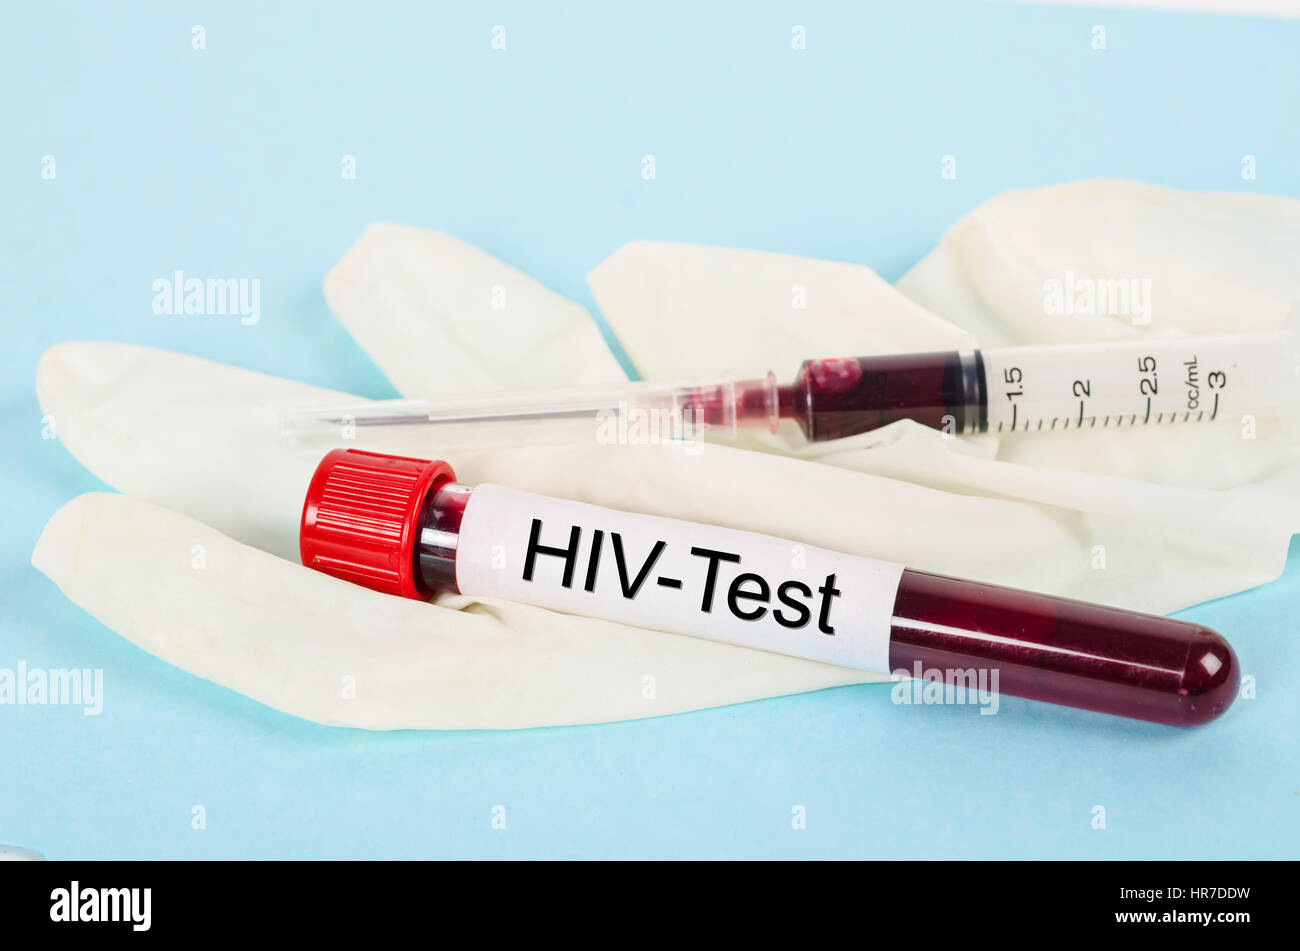 Sample blood collection tube with HIV test label in laboratory. Stock Photo